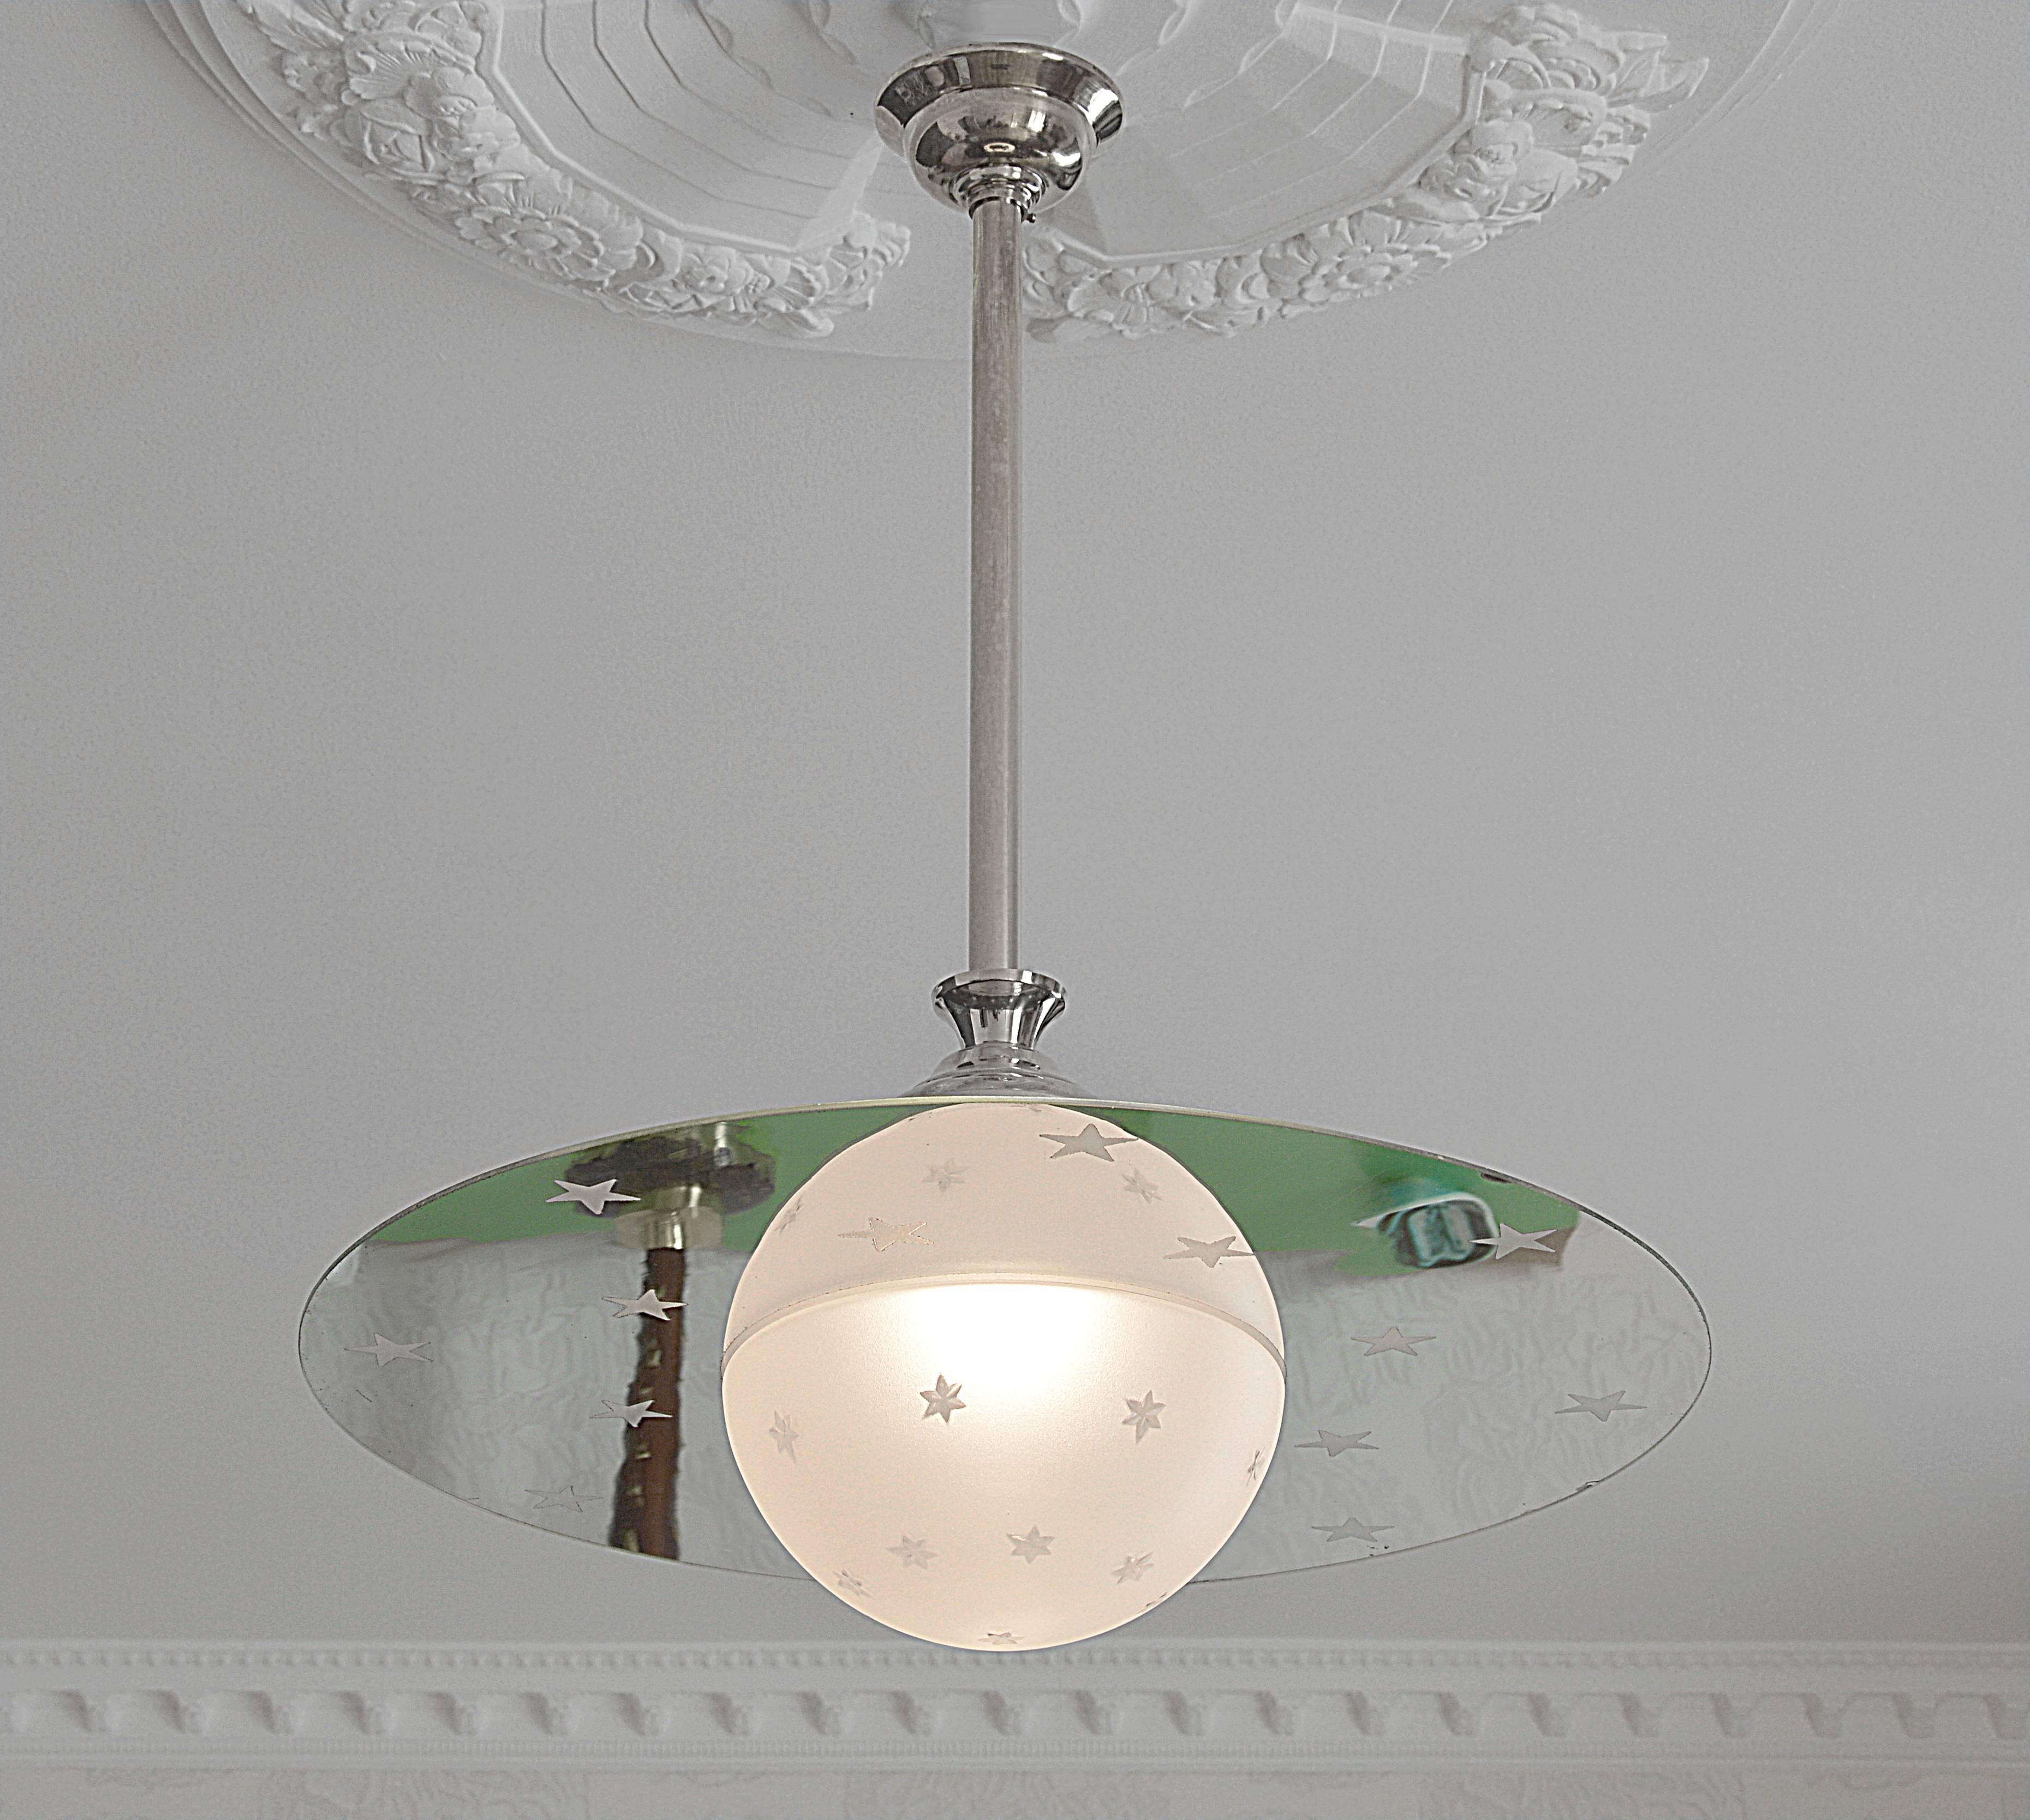 French Art Deco Saturn disk pendant chandelier which shows a stylized representation of the celestial vault. Modernism era. Frosted molded glass globe and mirror disk that show th. A beautiful representation of the celestial sphere and vault. Silver